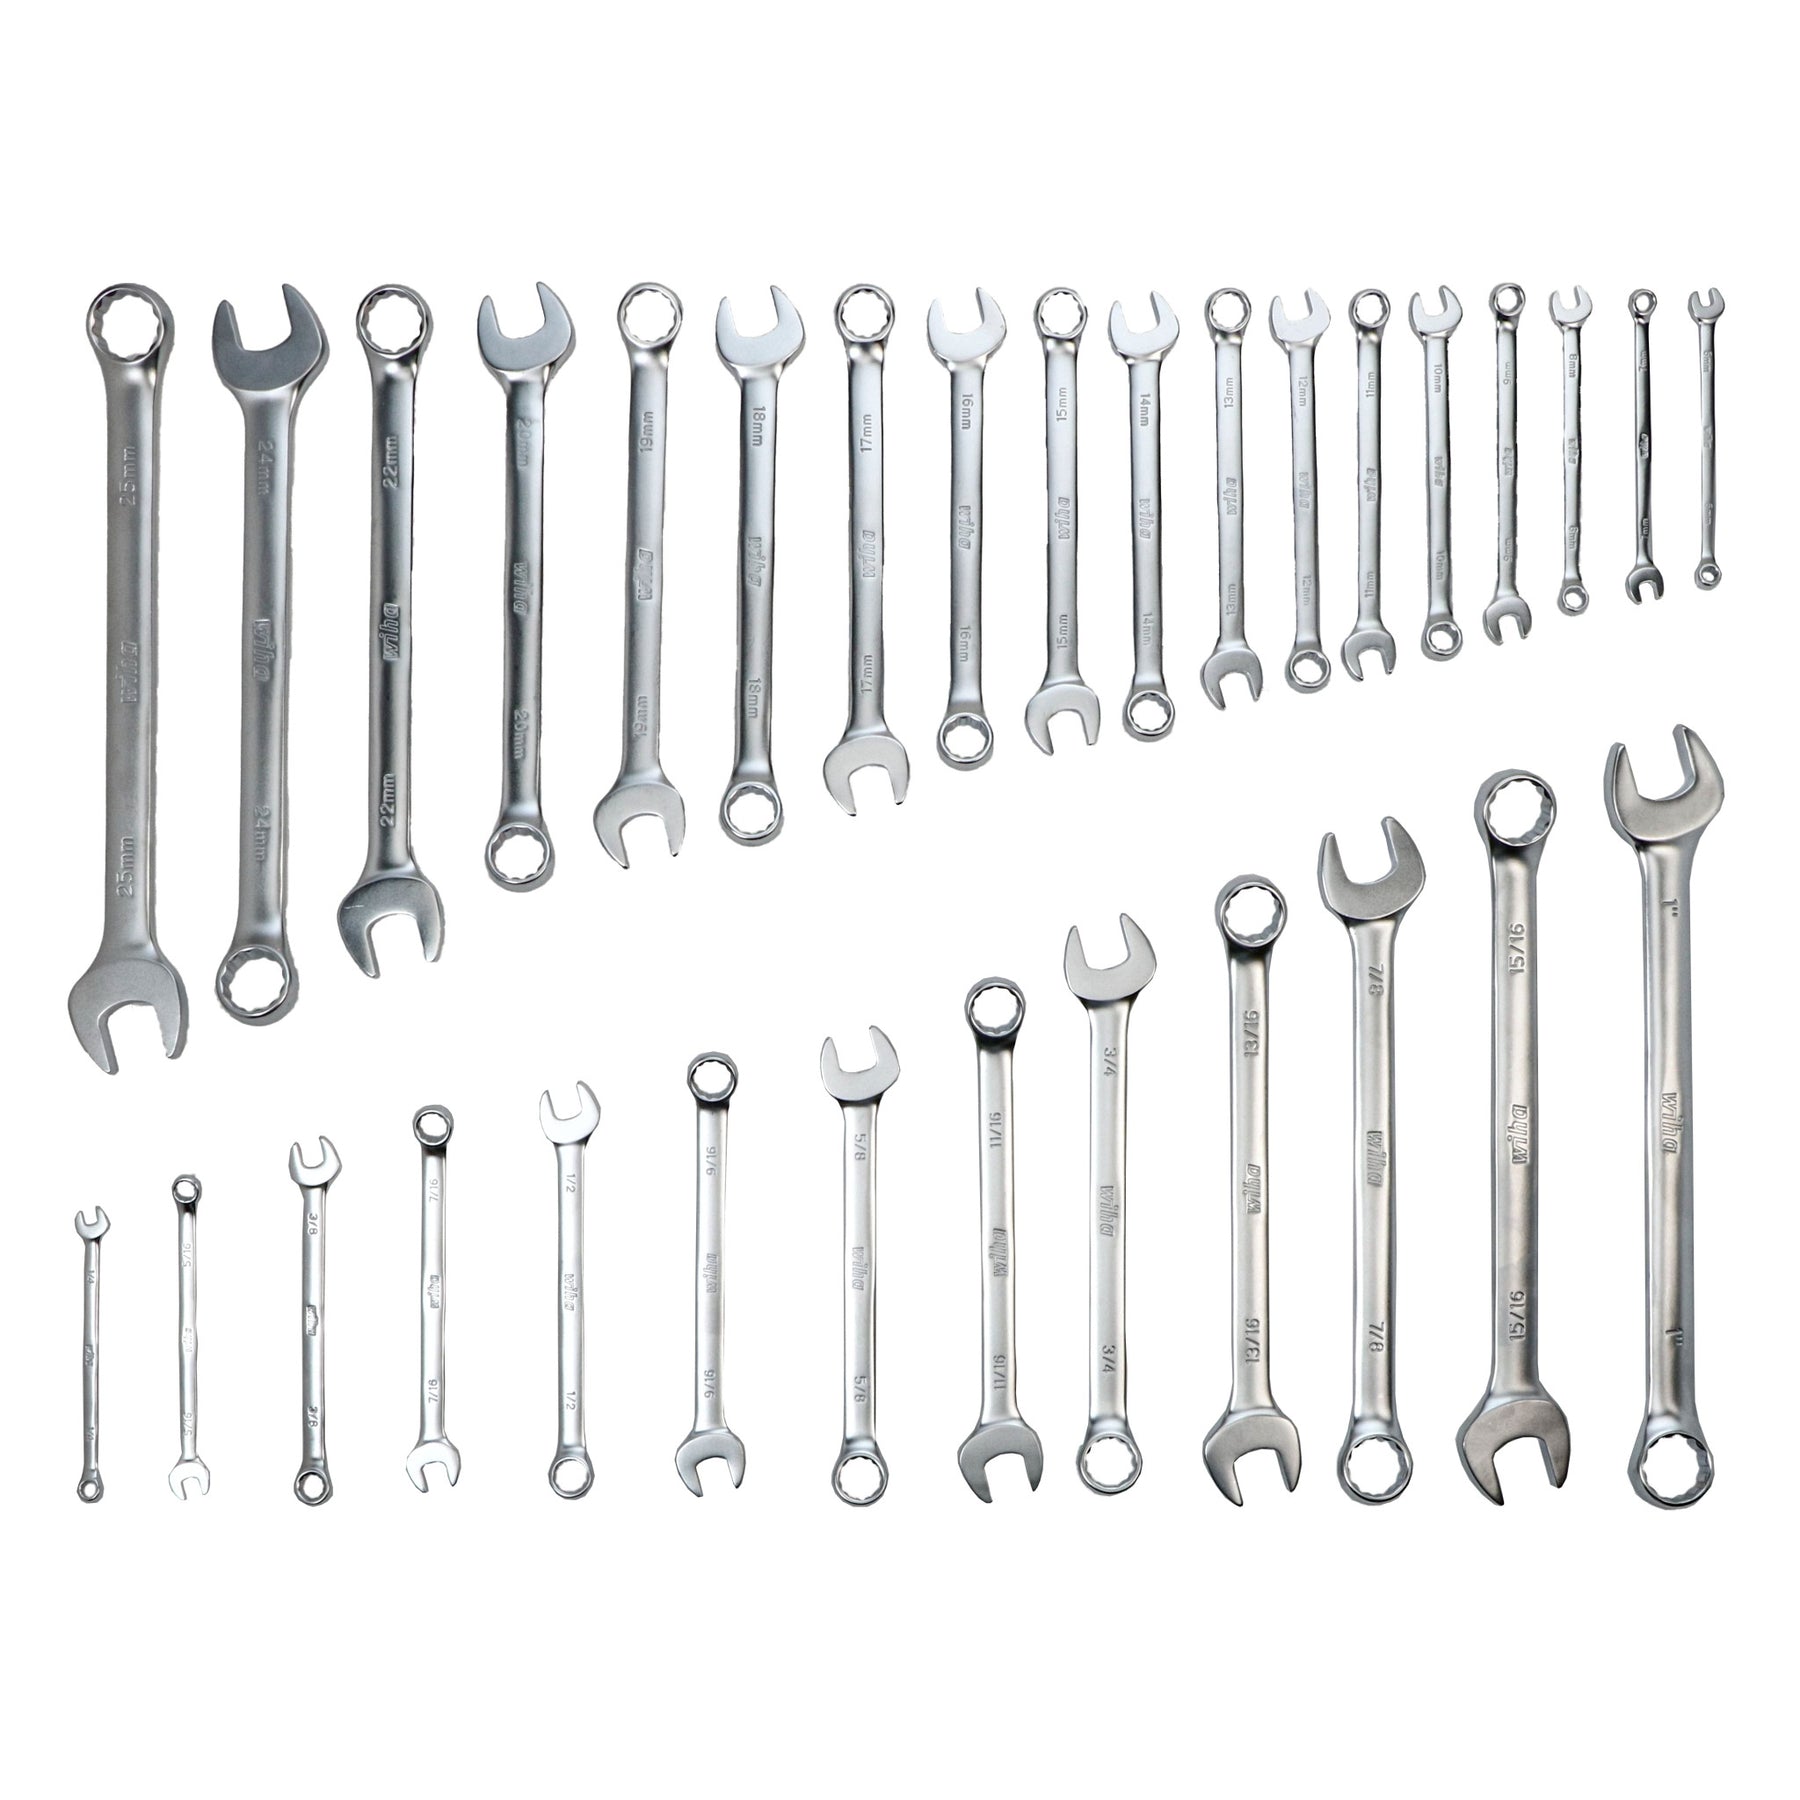 31 Piece Combination Wrench Tray Set - SAE and Metric